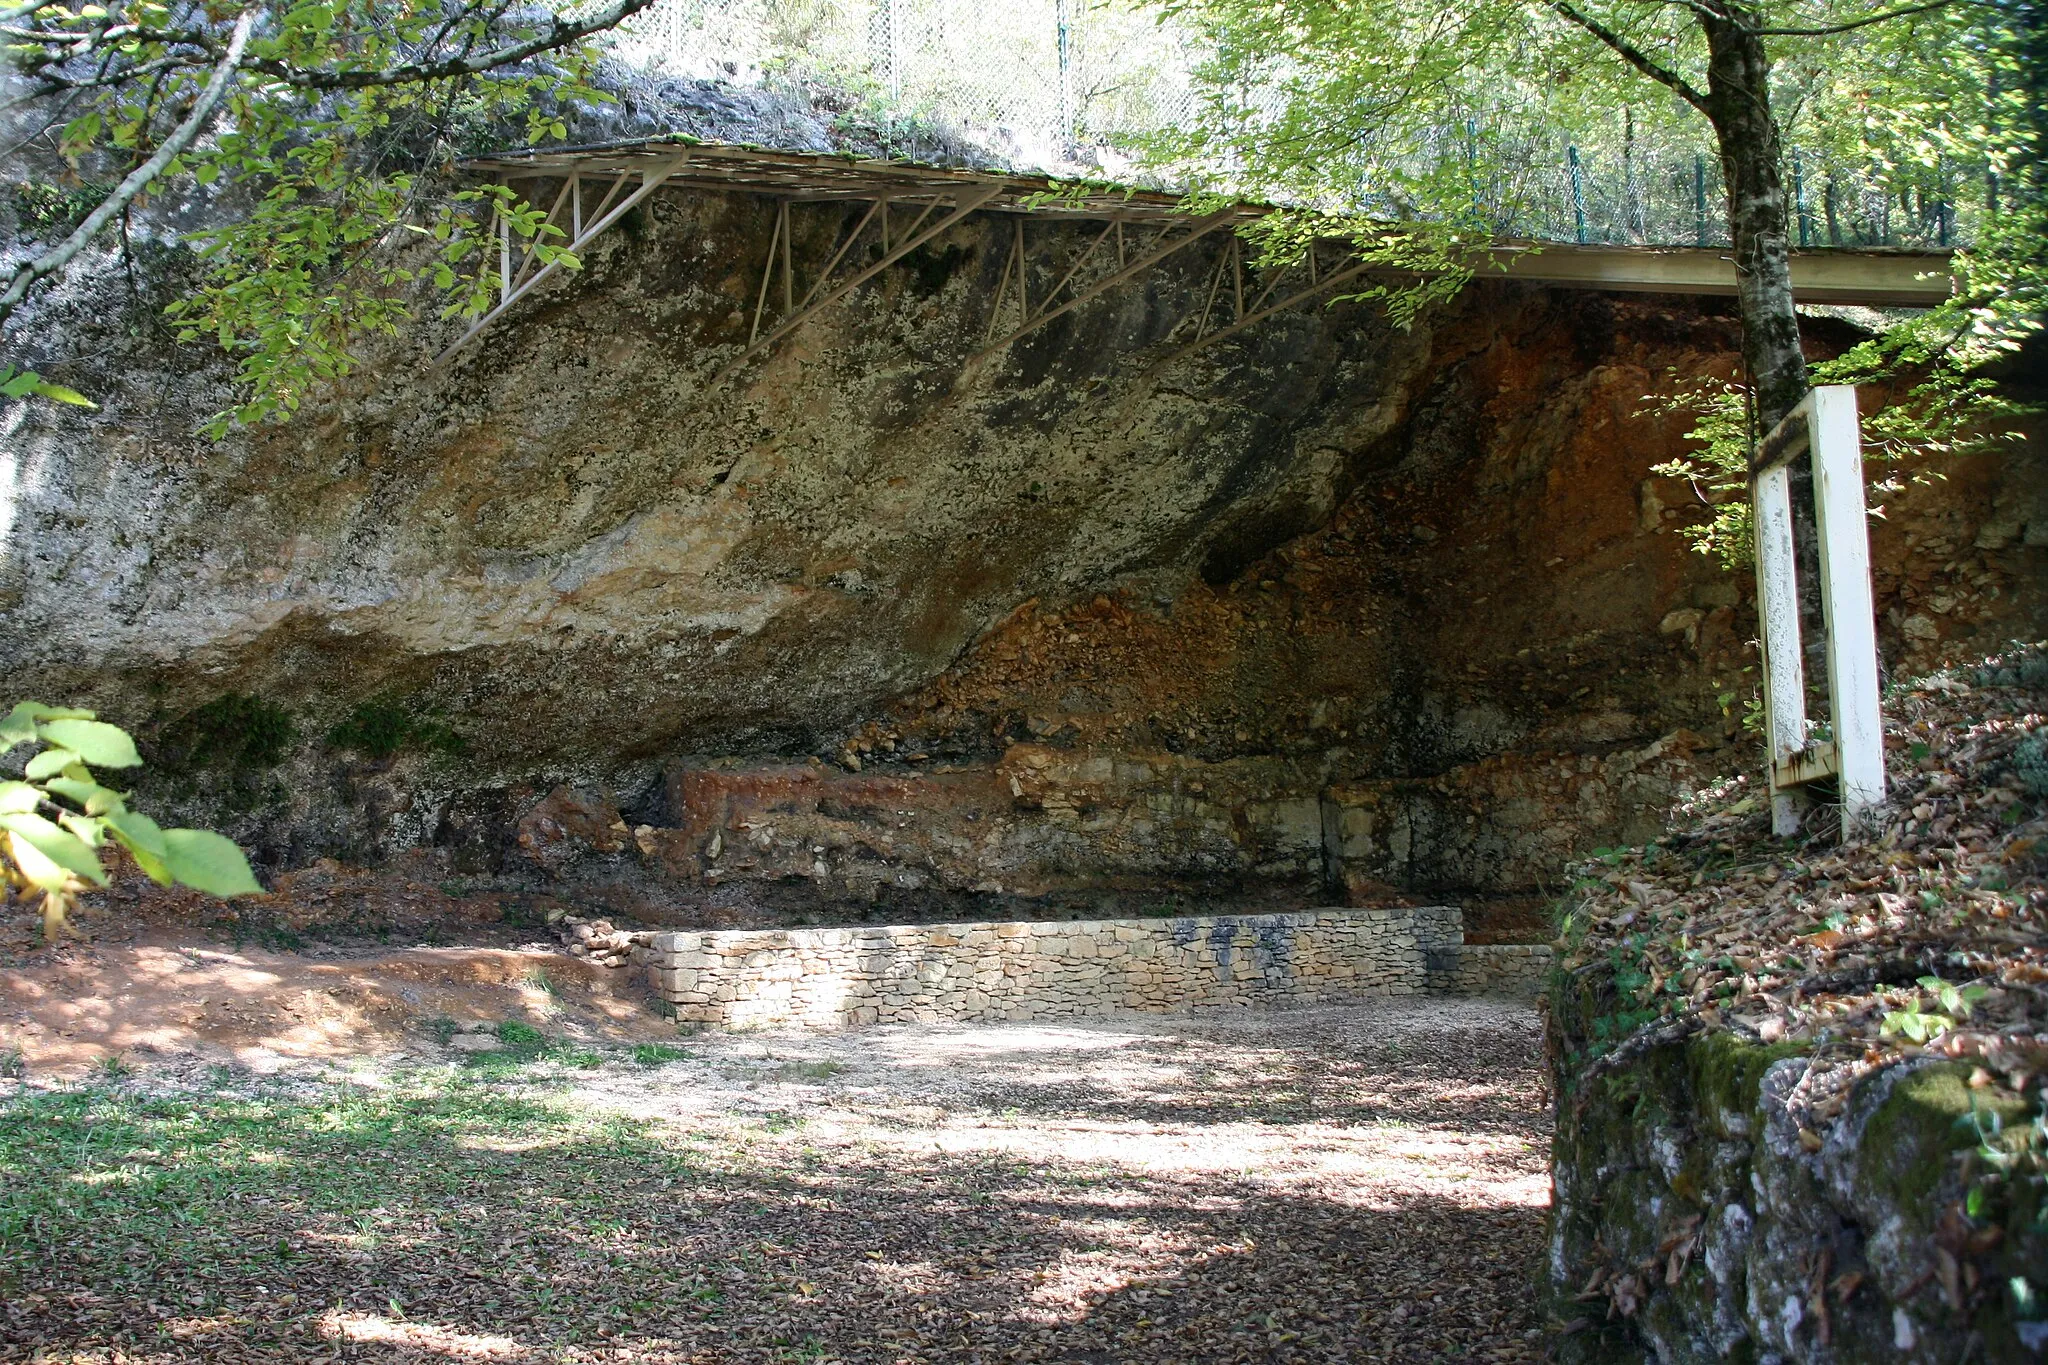 Photo showing: The great rockshelter of La Ferrassie, Savignac-de-Miremont, Dordogne, France. This site was occupied by Neanderthals between roughly 45.000 to 38,300 years BP.